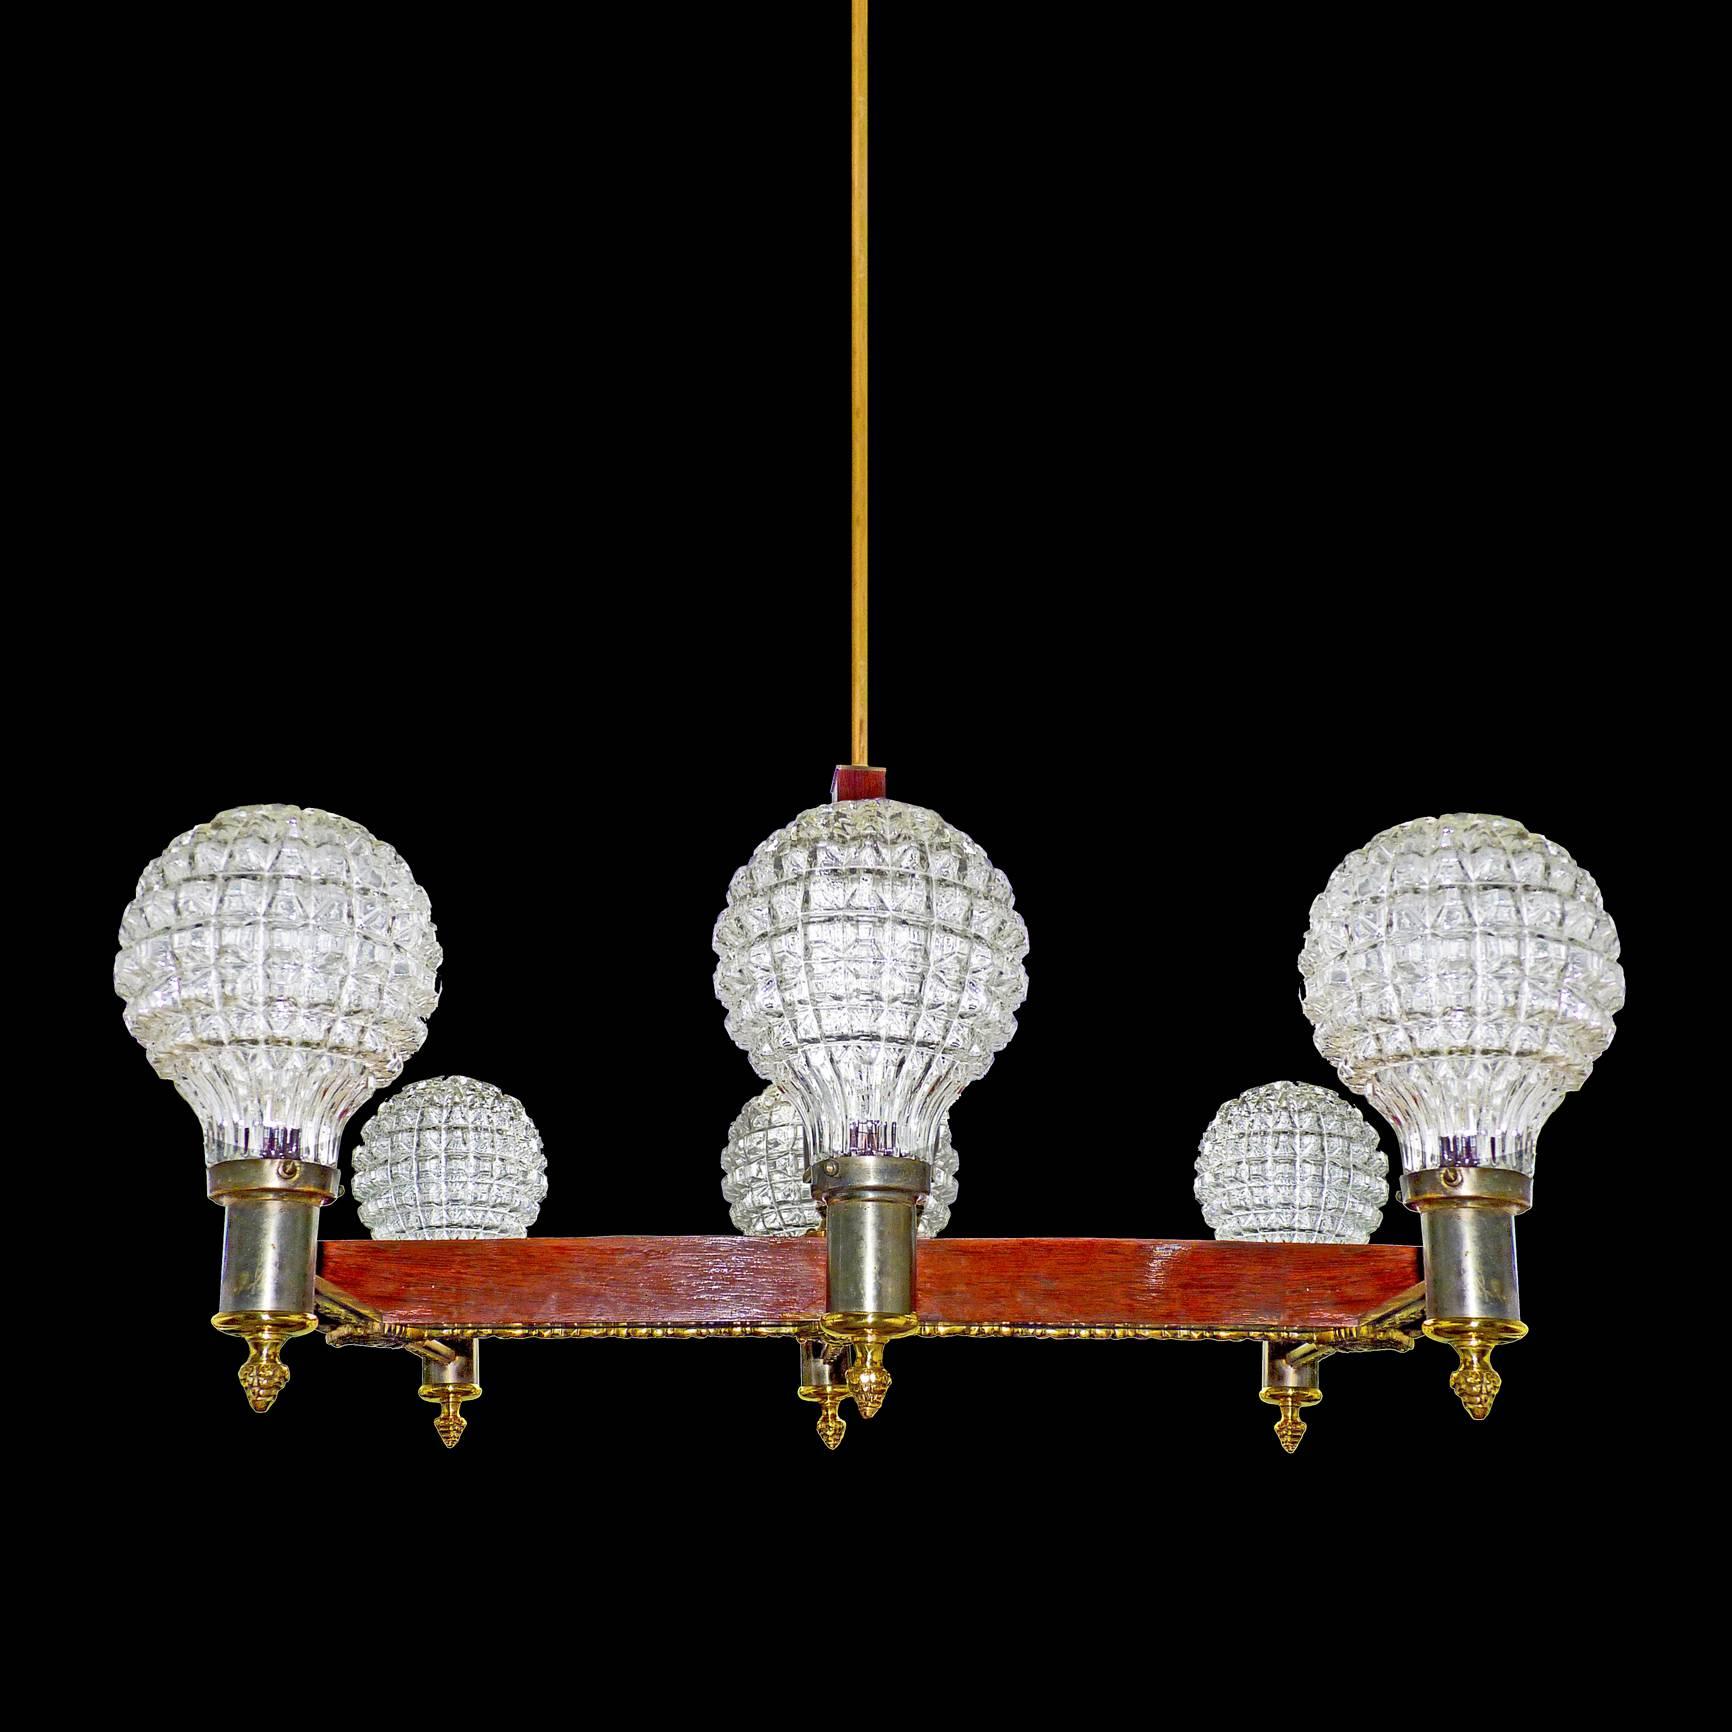 Large Modernist French Art Deco Bronze Wood Brass Six-Light Ice Glass Chandelier In Good Condition For Sale In Coimbra, PT